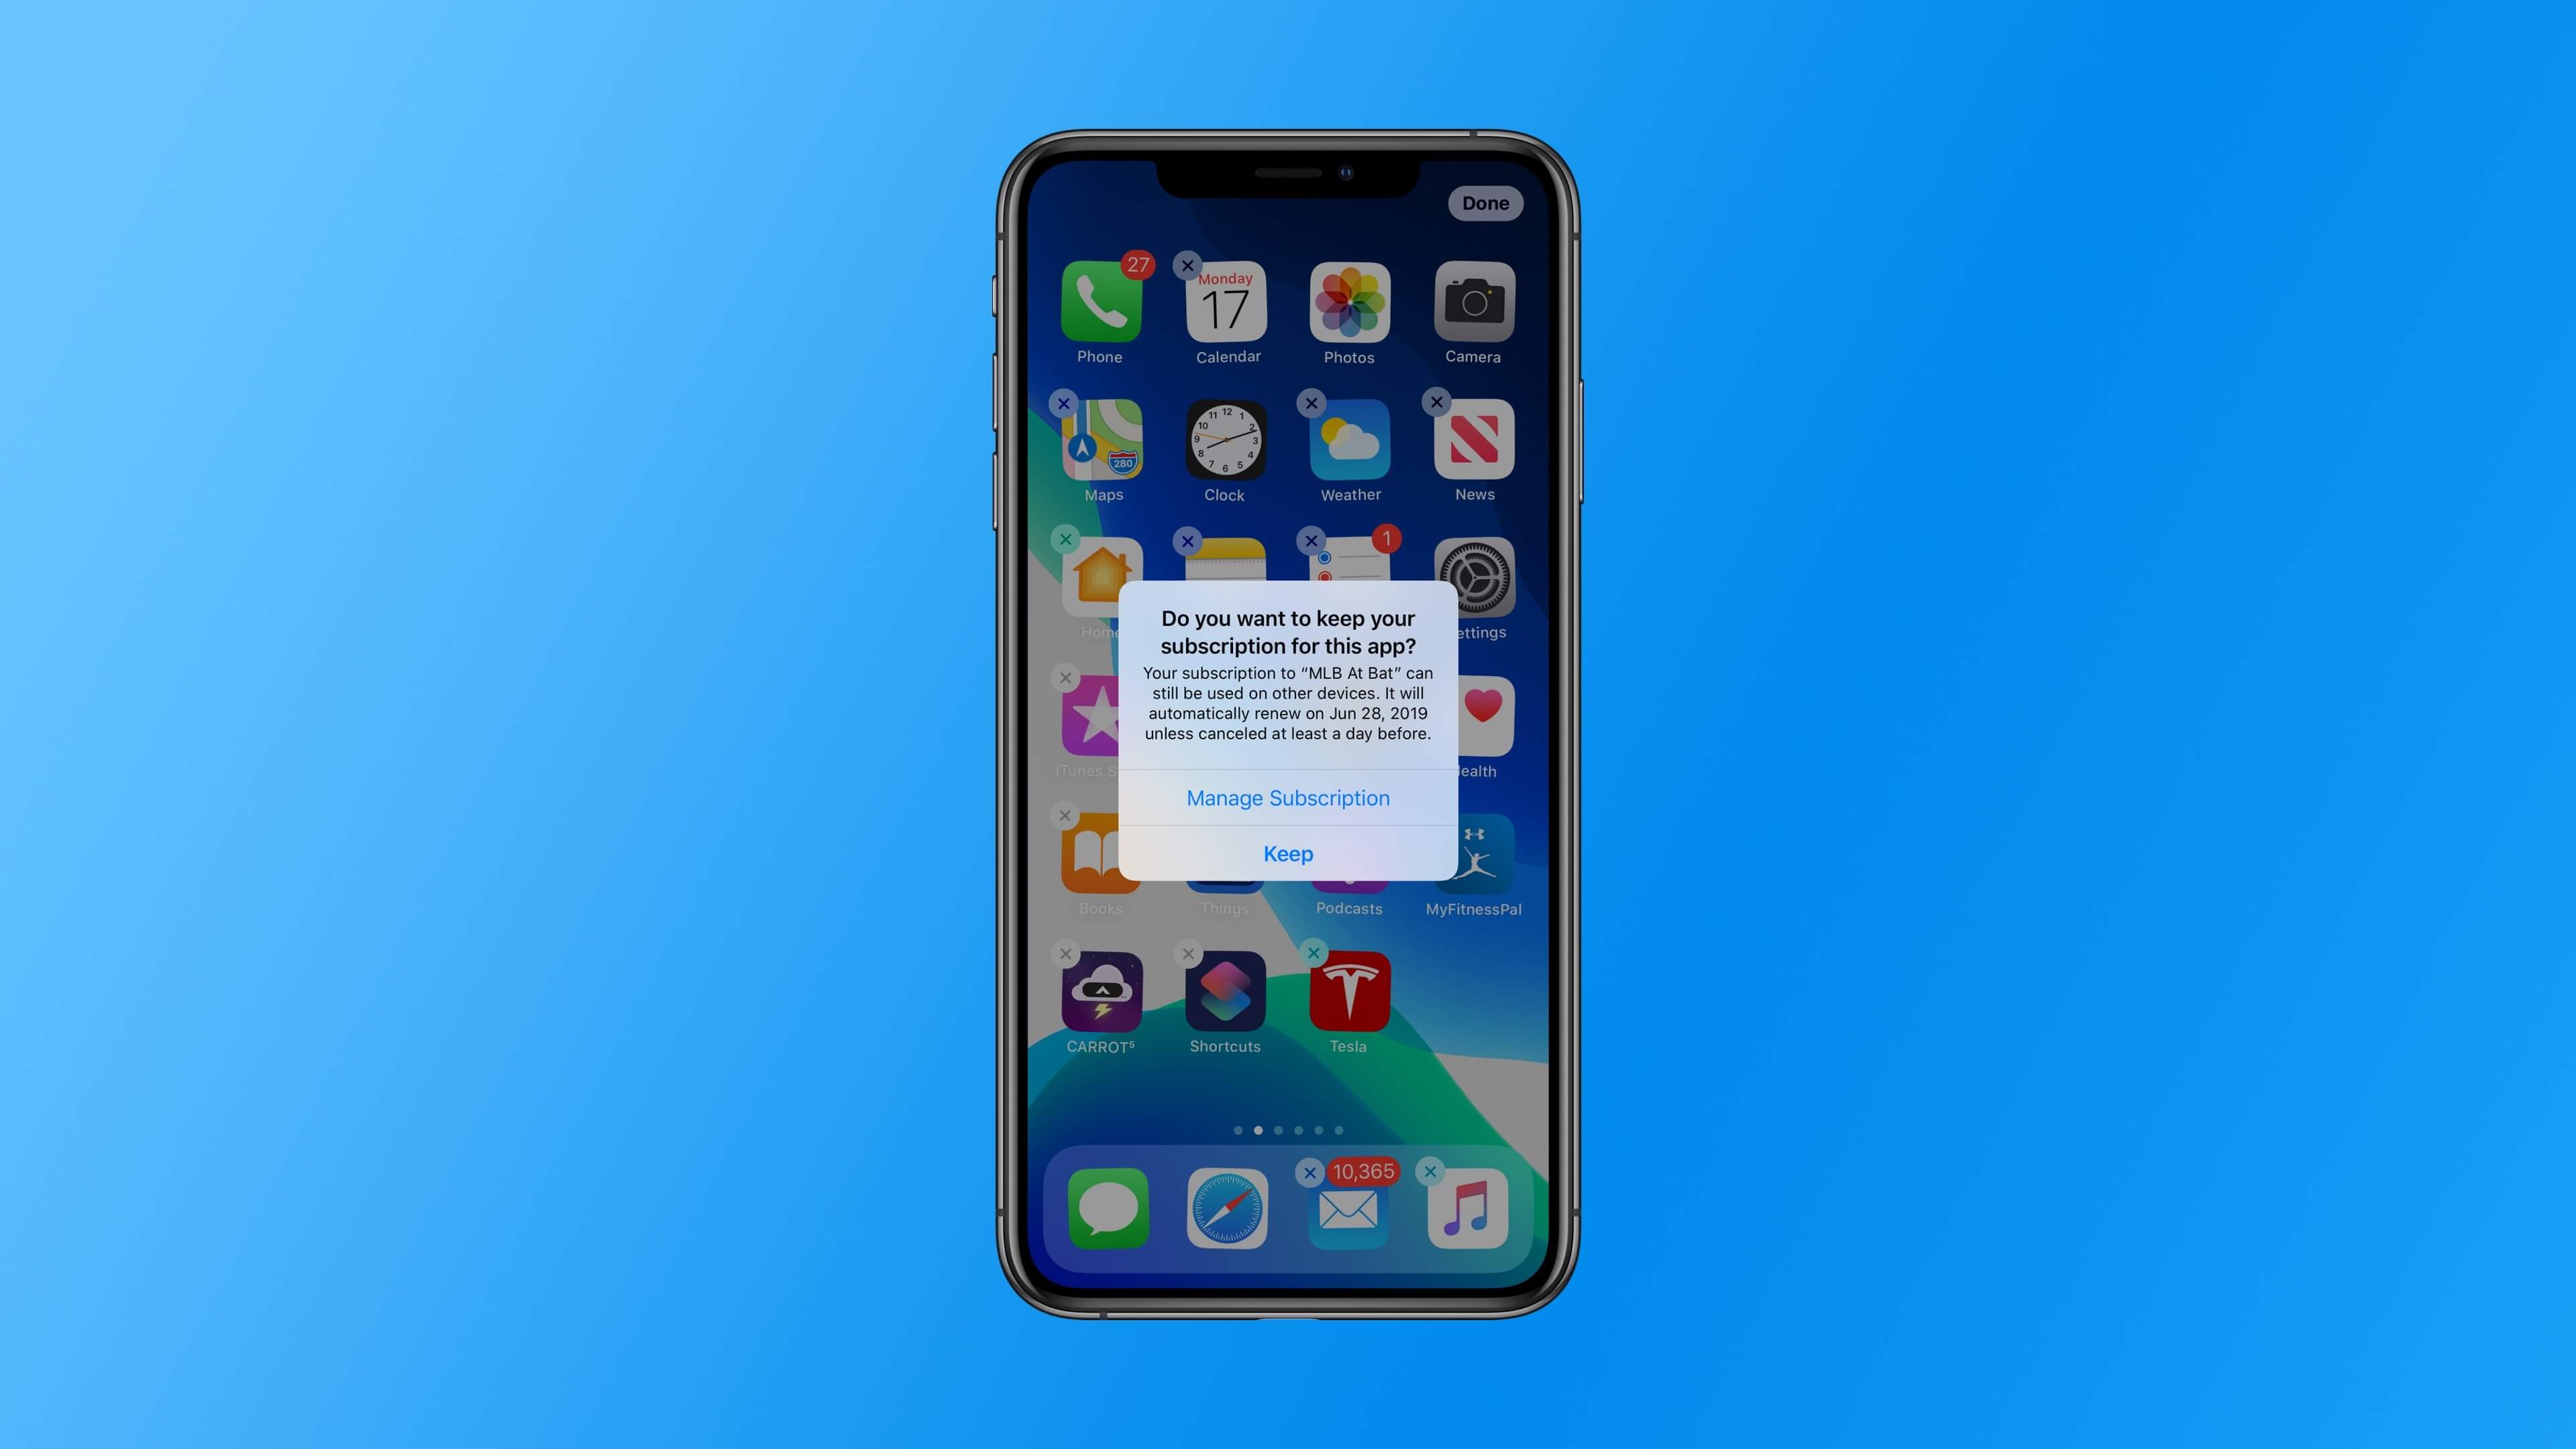 iOS 13 will warn users if they delete an app with an active subscription